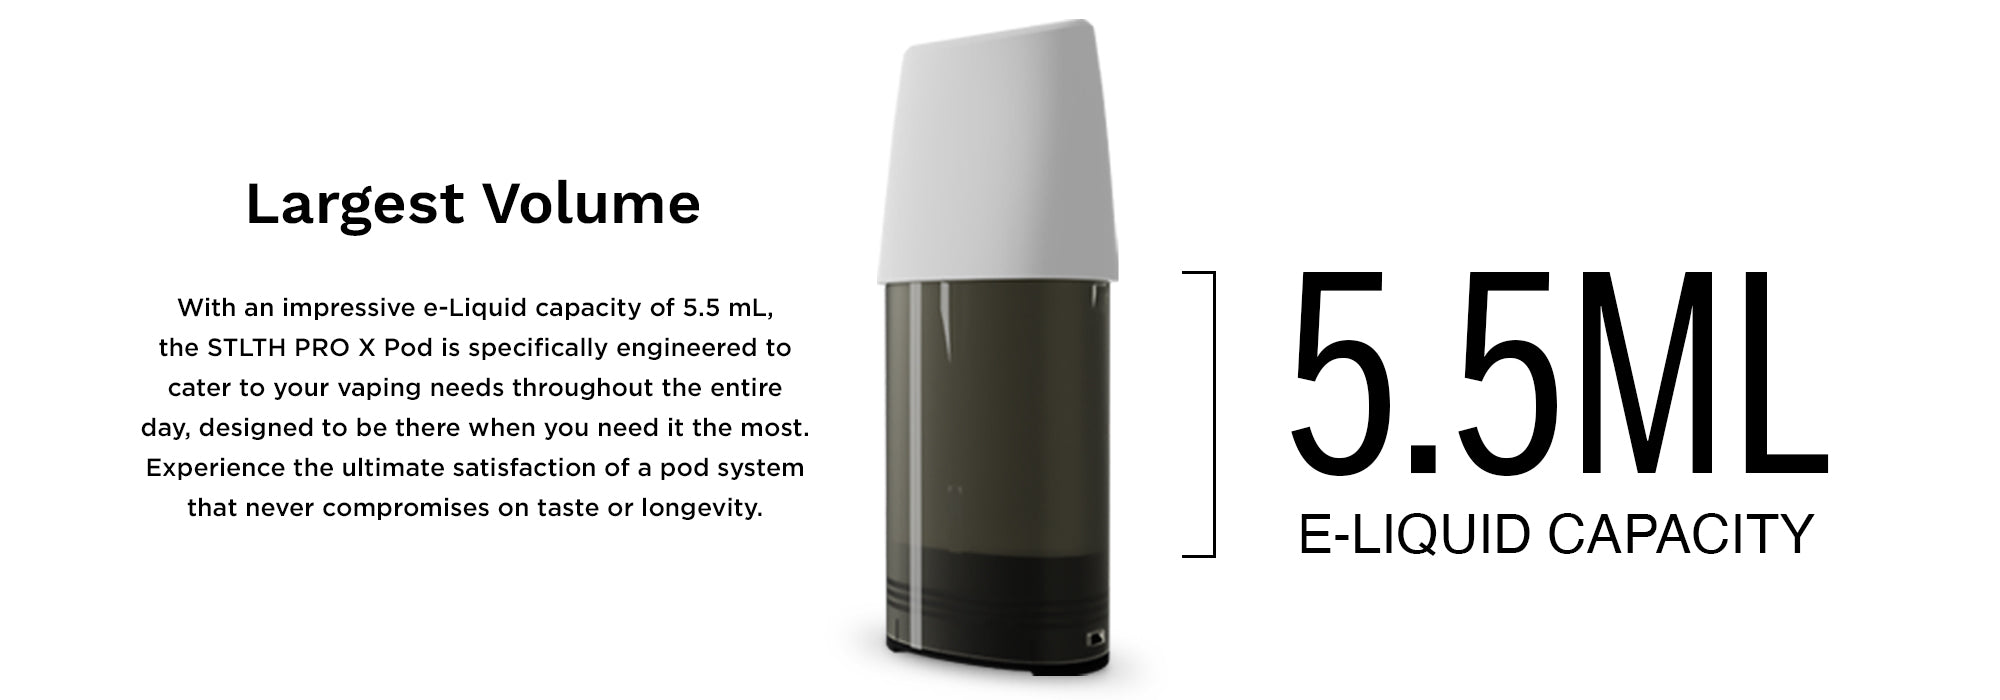 Largest Volume: With an impressive e-liquid capacity of 5.5 mL, the STLTH Pro X Pod is specifically engineered to cater to your vaping needs throughout the entire day, designed to be there when you need it the most. Experience the ultimate satisfaction of a pod system that never compromises on taste or longevity.